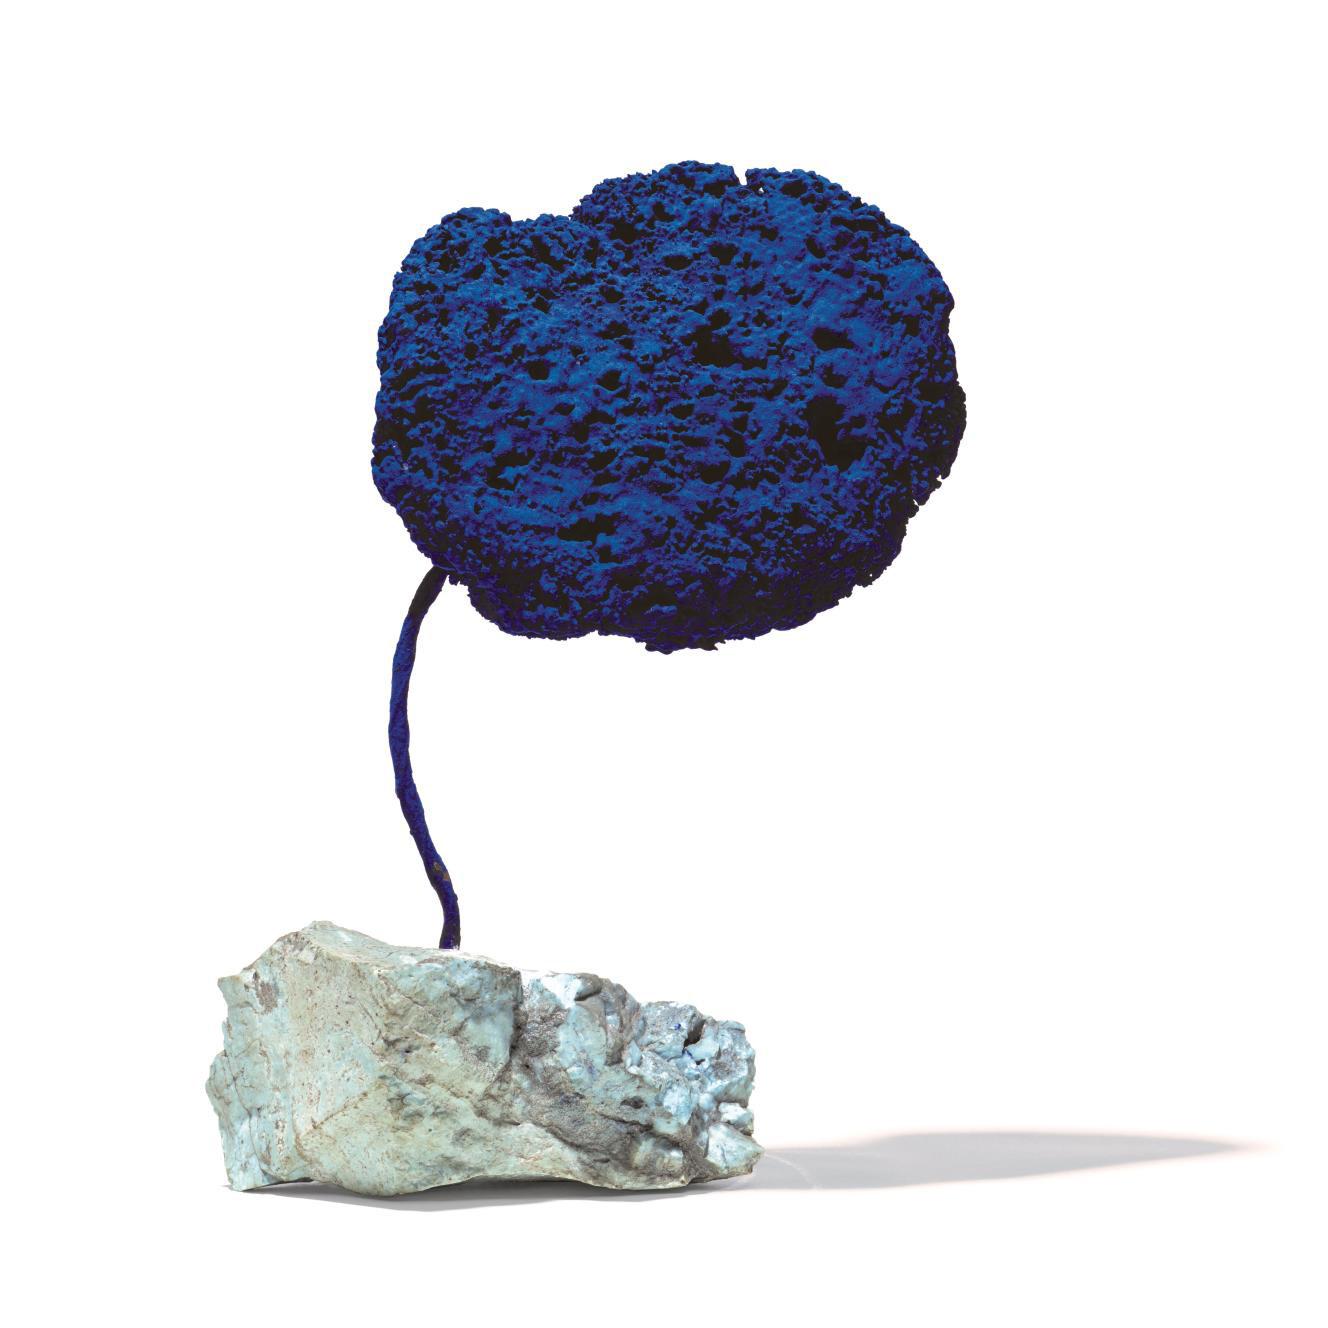 Yves Klein: In Search of Infinity  - Pre-sale